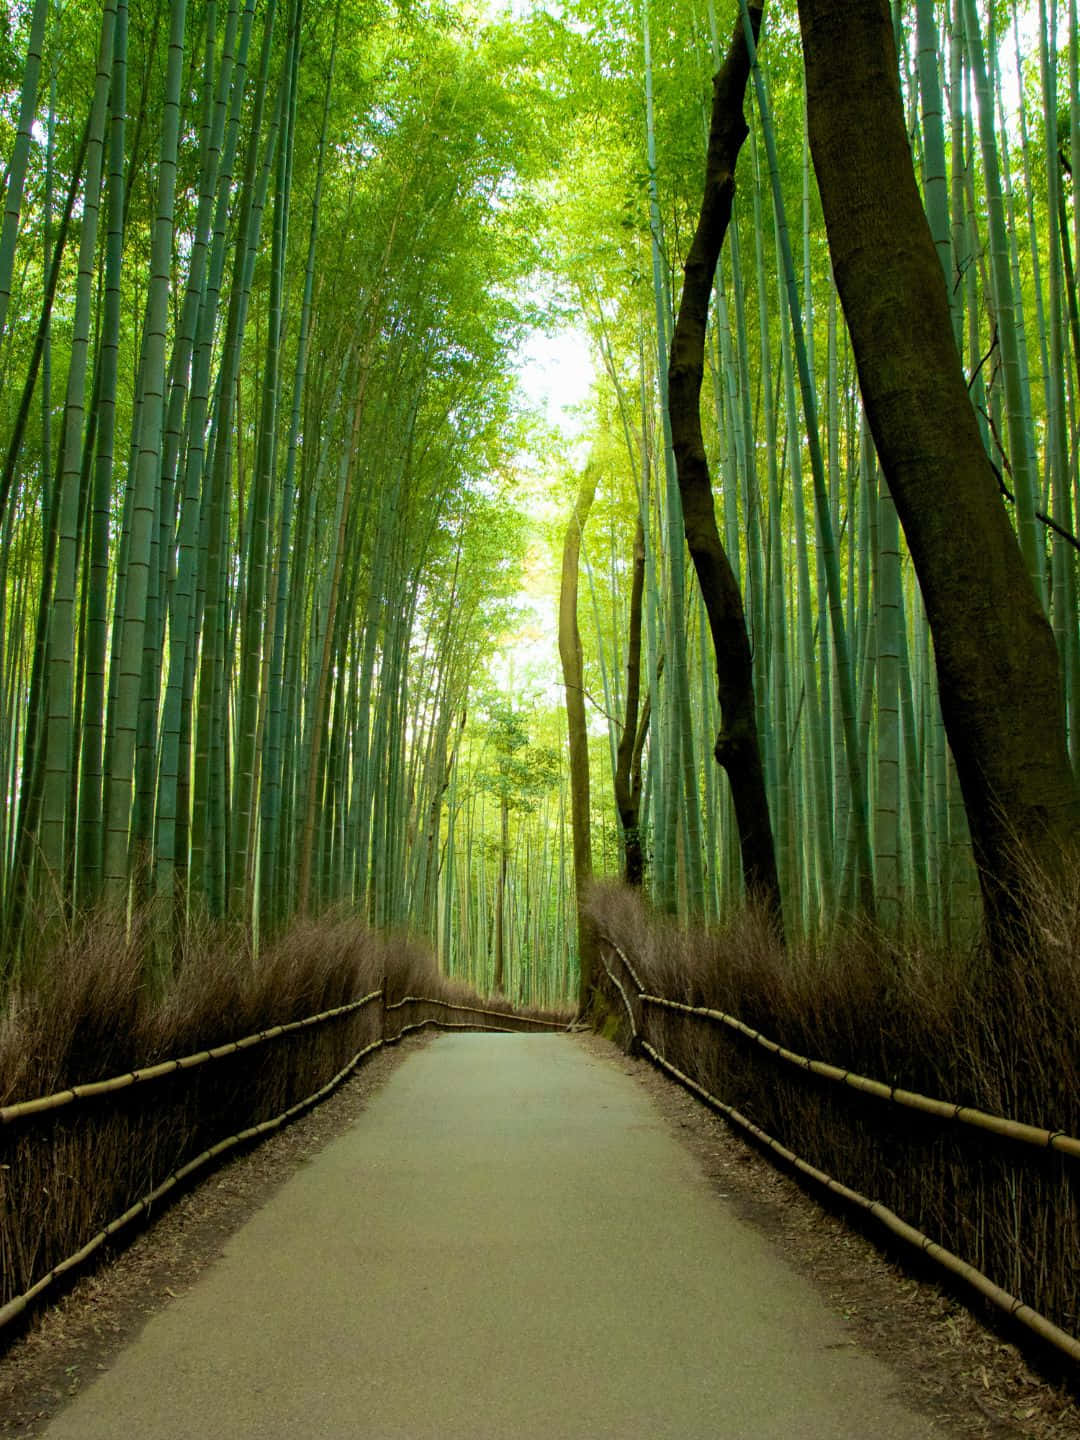 1440p Bamboo Background Smooth Road Surrounded By Bamboo Trees